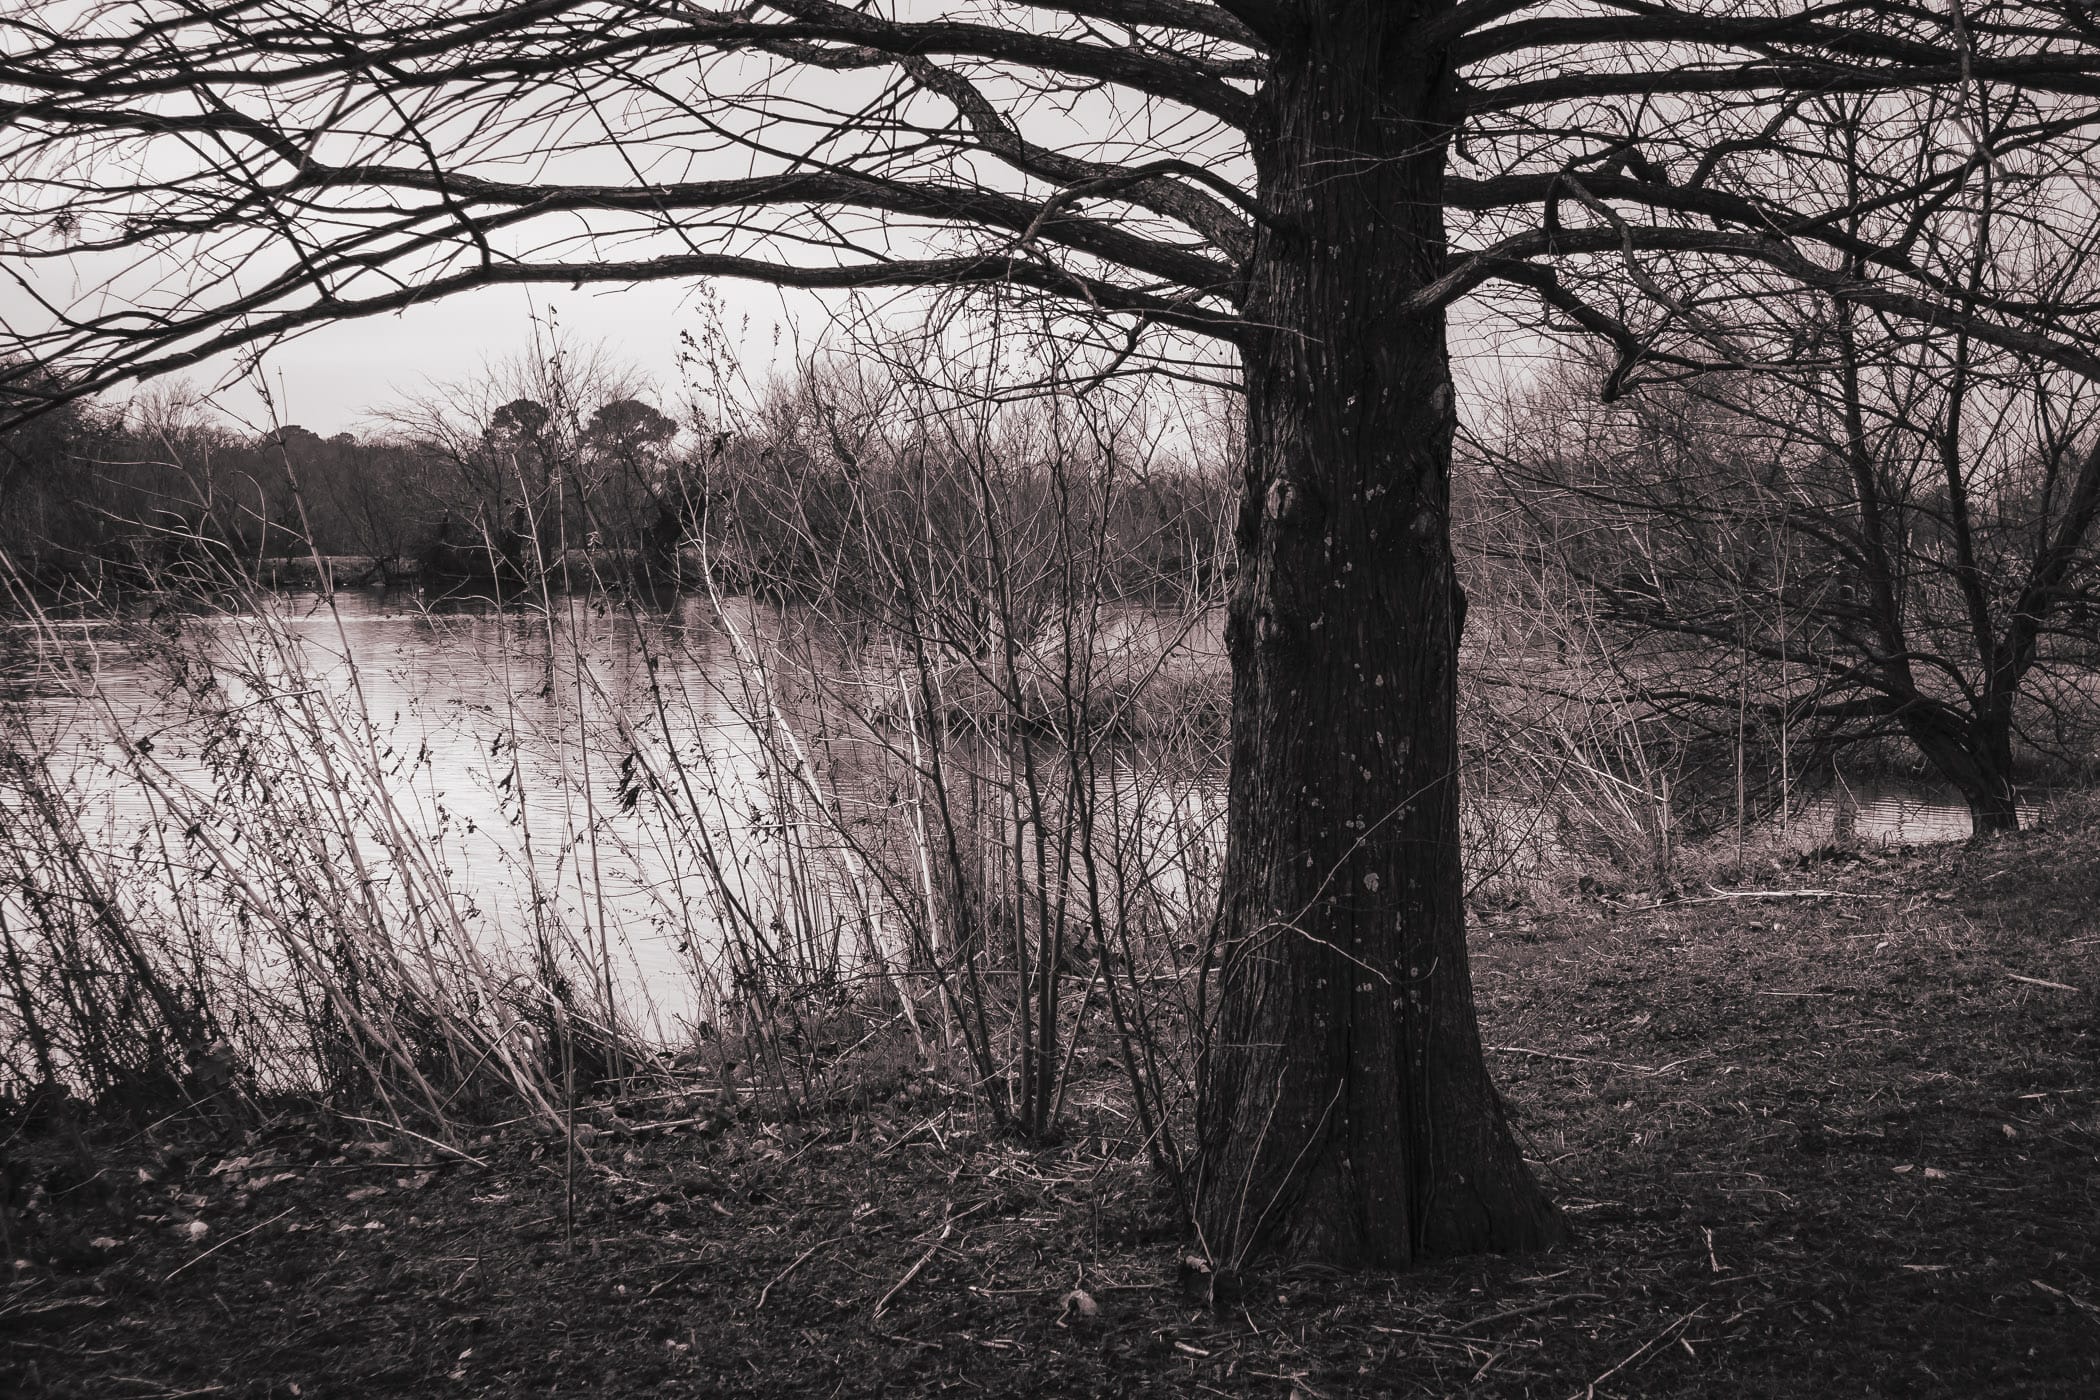 Trees and brush growing along the shore of a pond on the campus of the University of North Texas in Denton.